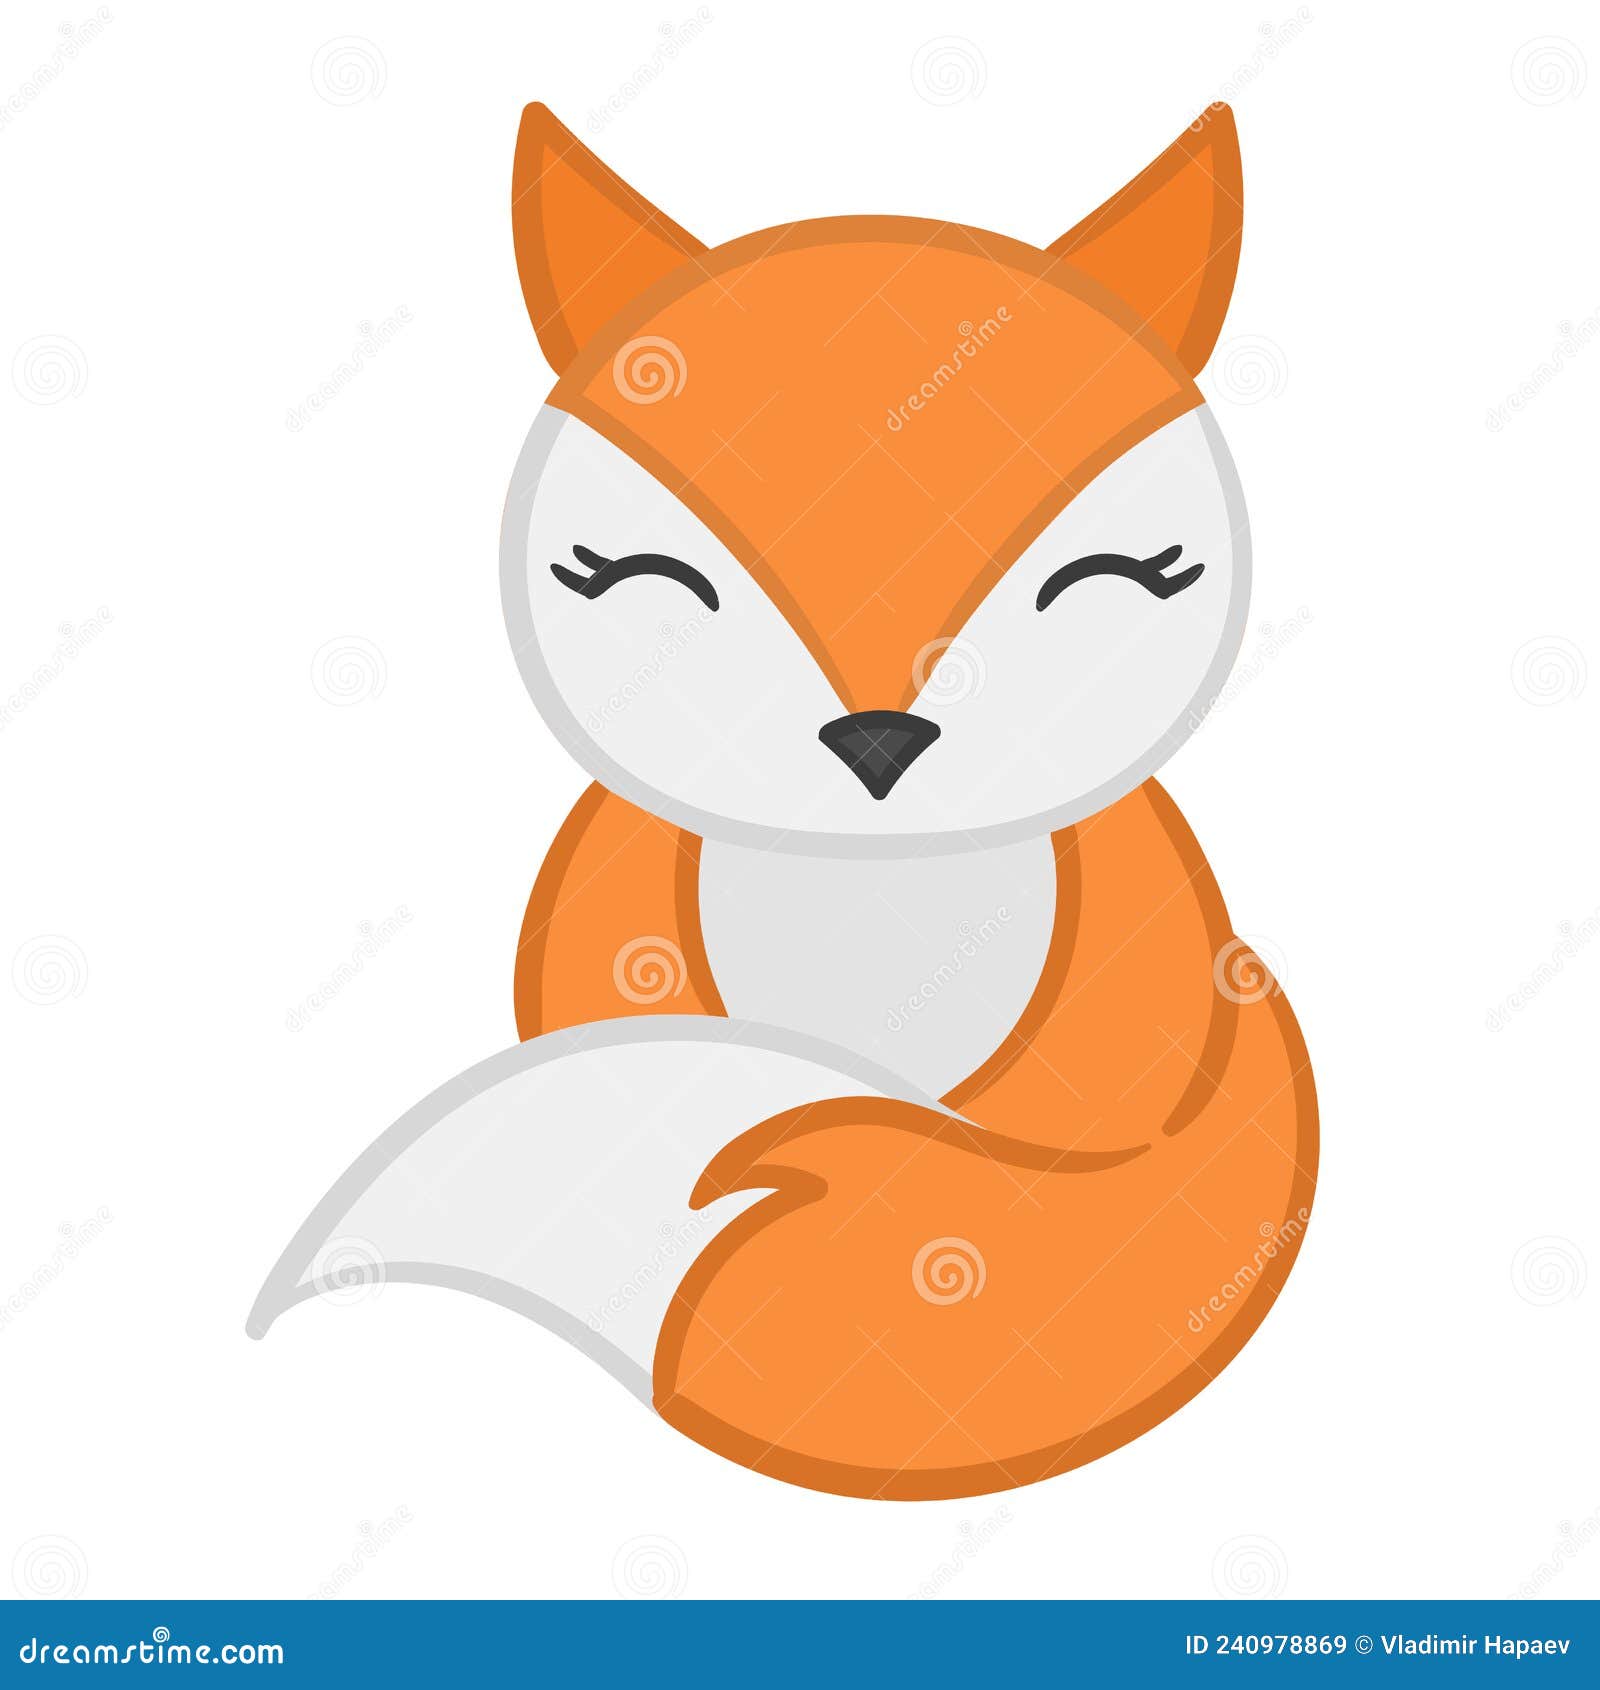 Cute Cartoon Fox Isolated on a White Background Vector Illustration ...